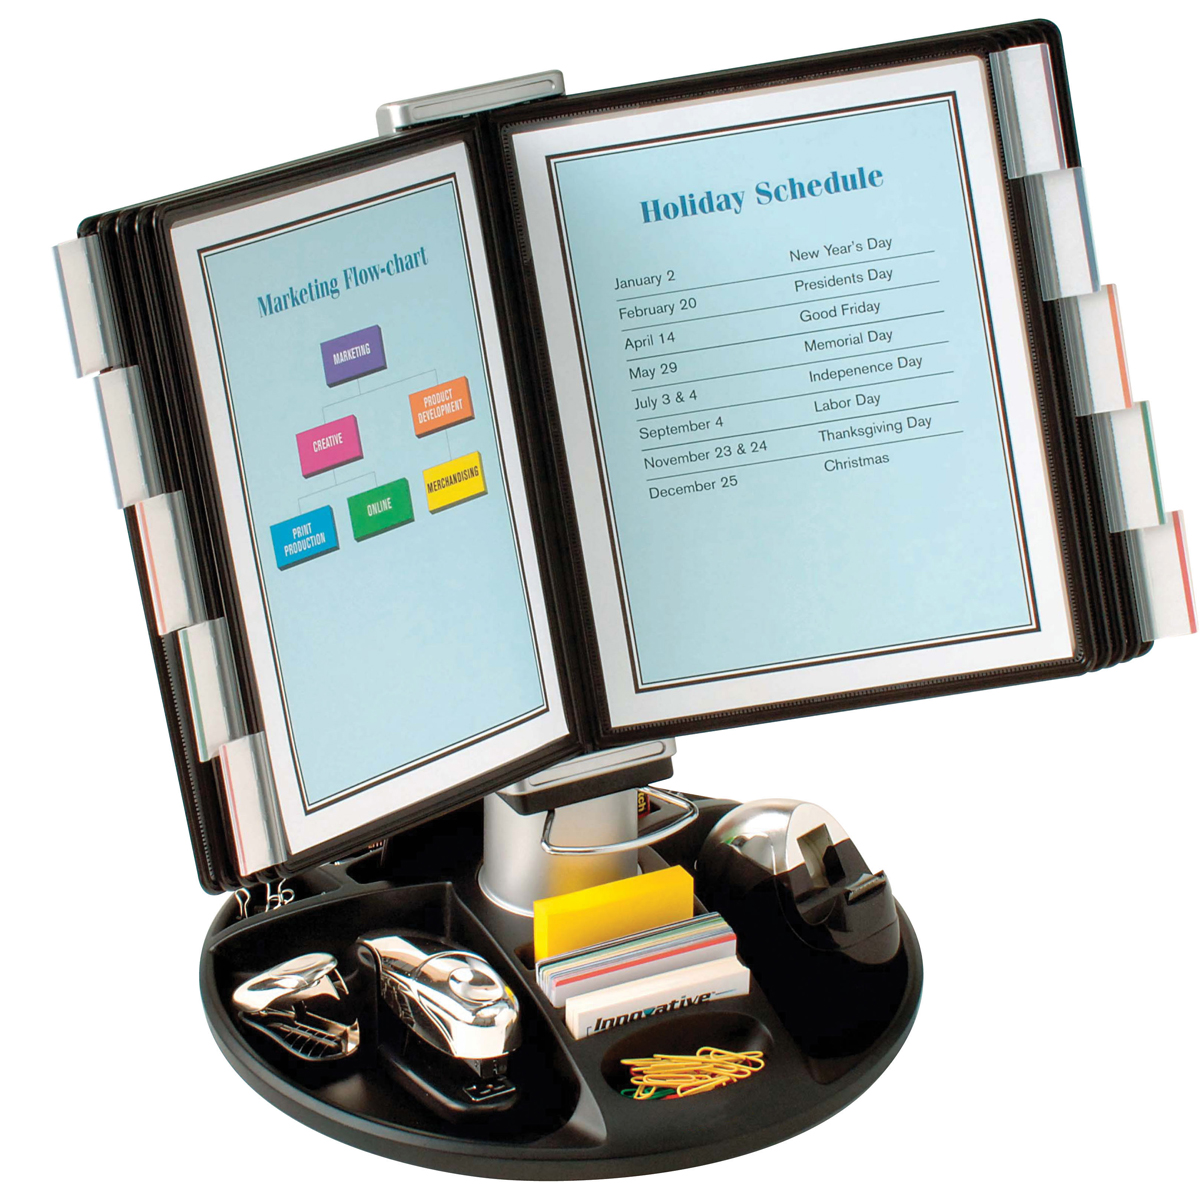 Executive Rotary Base Flip And Find Display Carousel By Aidata